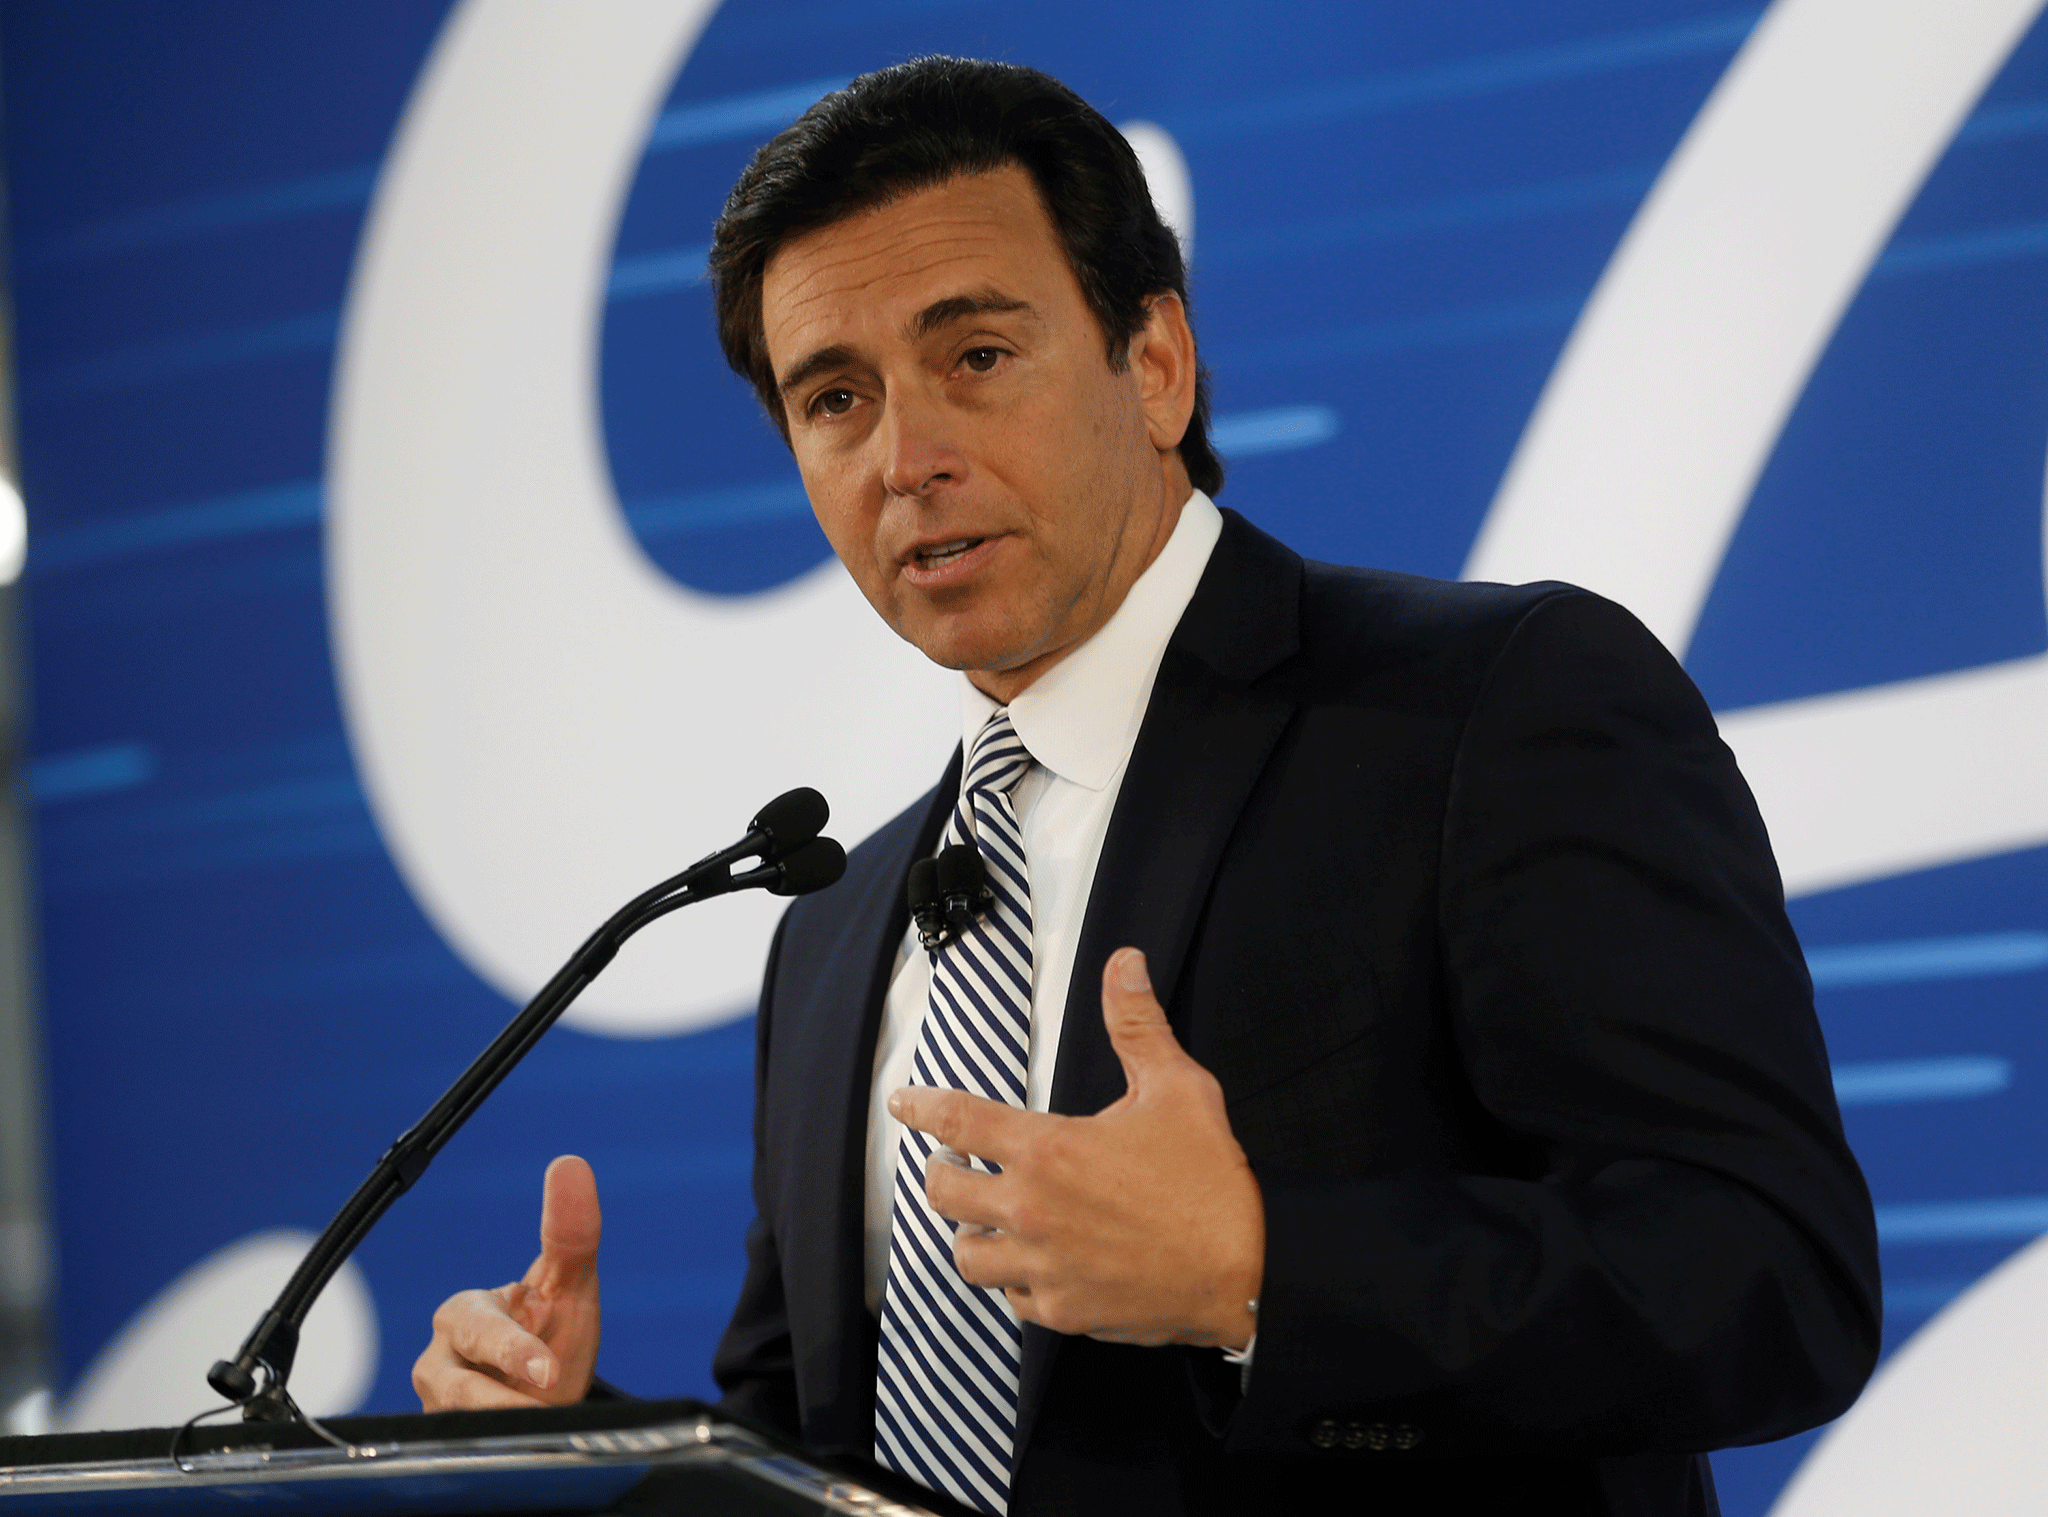 Mark Fields (pictured) will be replaced by Jim Hackett, a turnaround specialist who has been leading the car manufacturer’s moves into self-driving cars